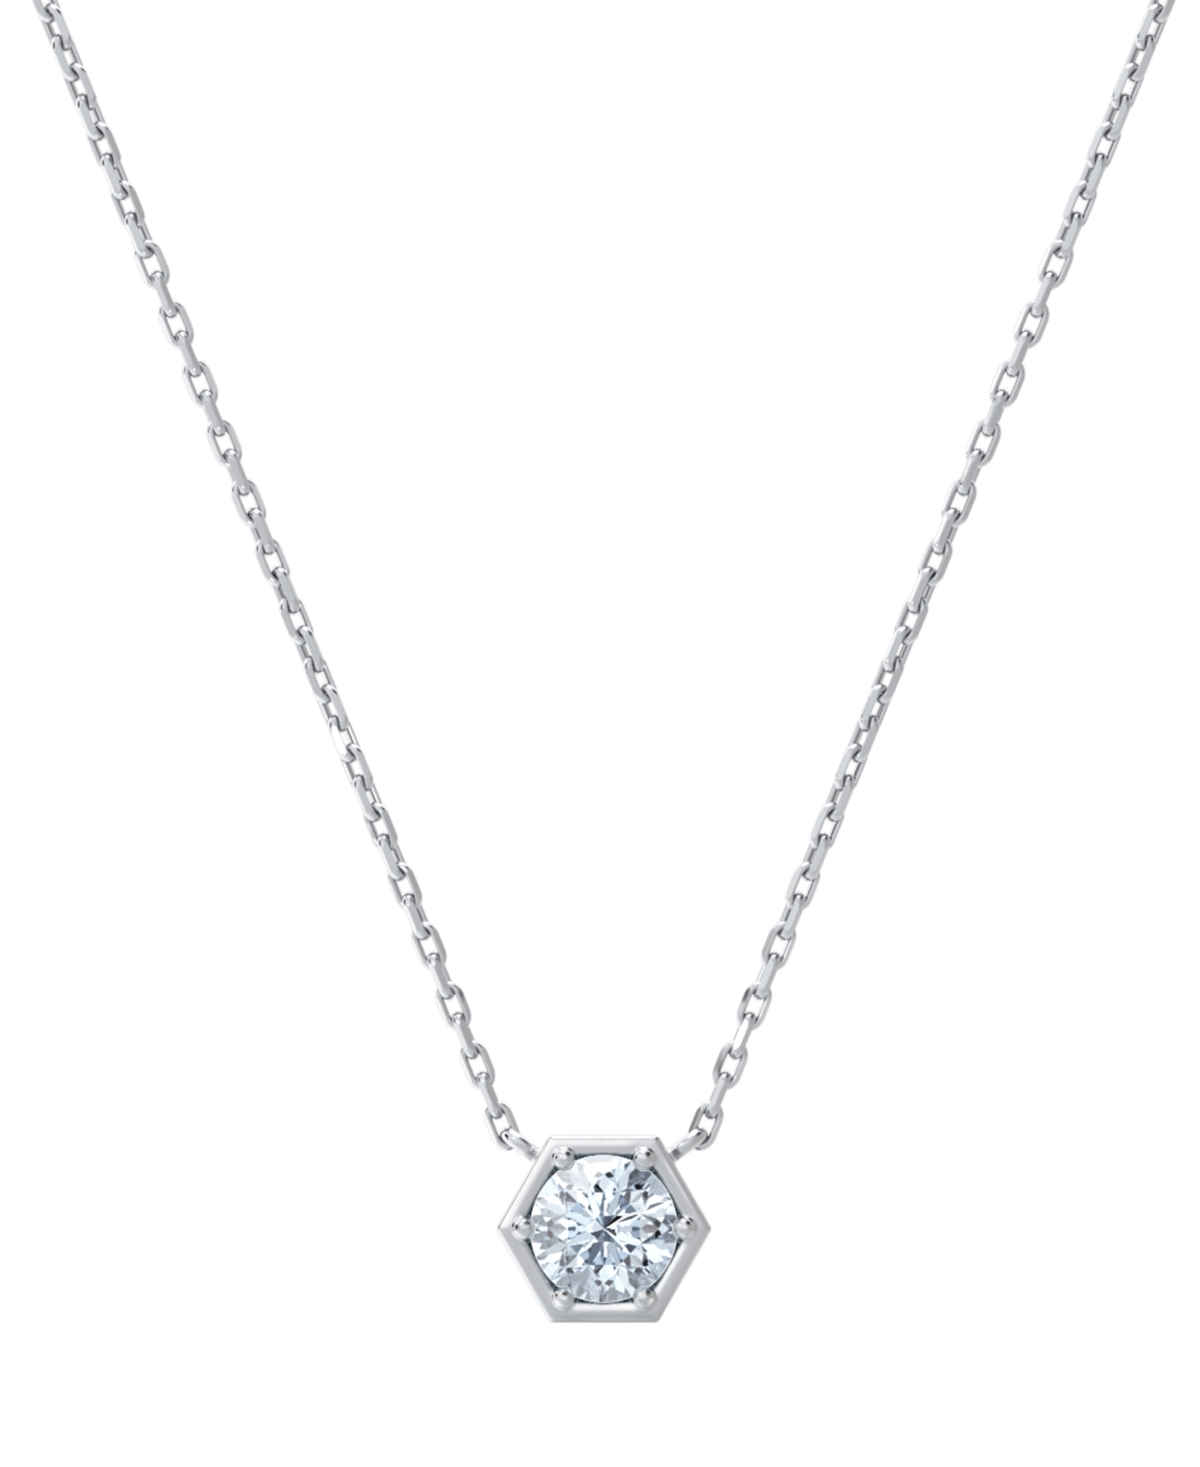 De Beers Forevermark Portfolio by De Beers Forevermark Diamond Honeycomb Solitaire Pendant Necklace (1/4 ct. t.w.) in 14k White or Yellow Gold, 16" + 2" extender